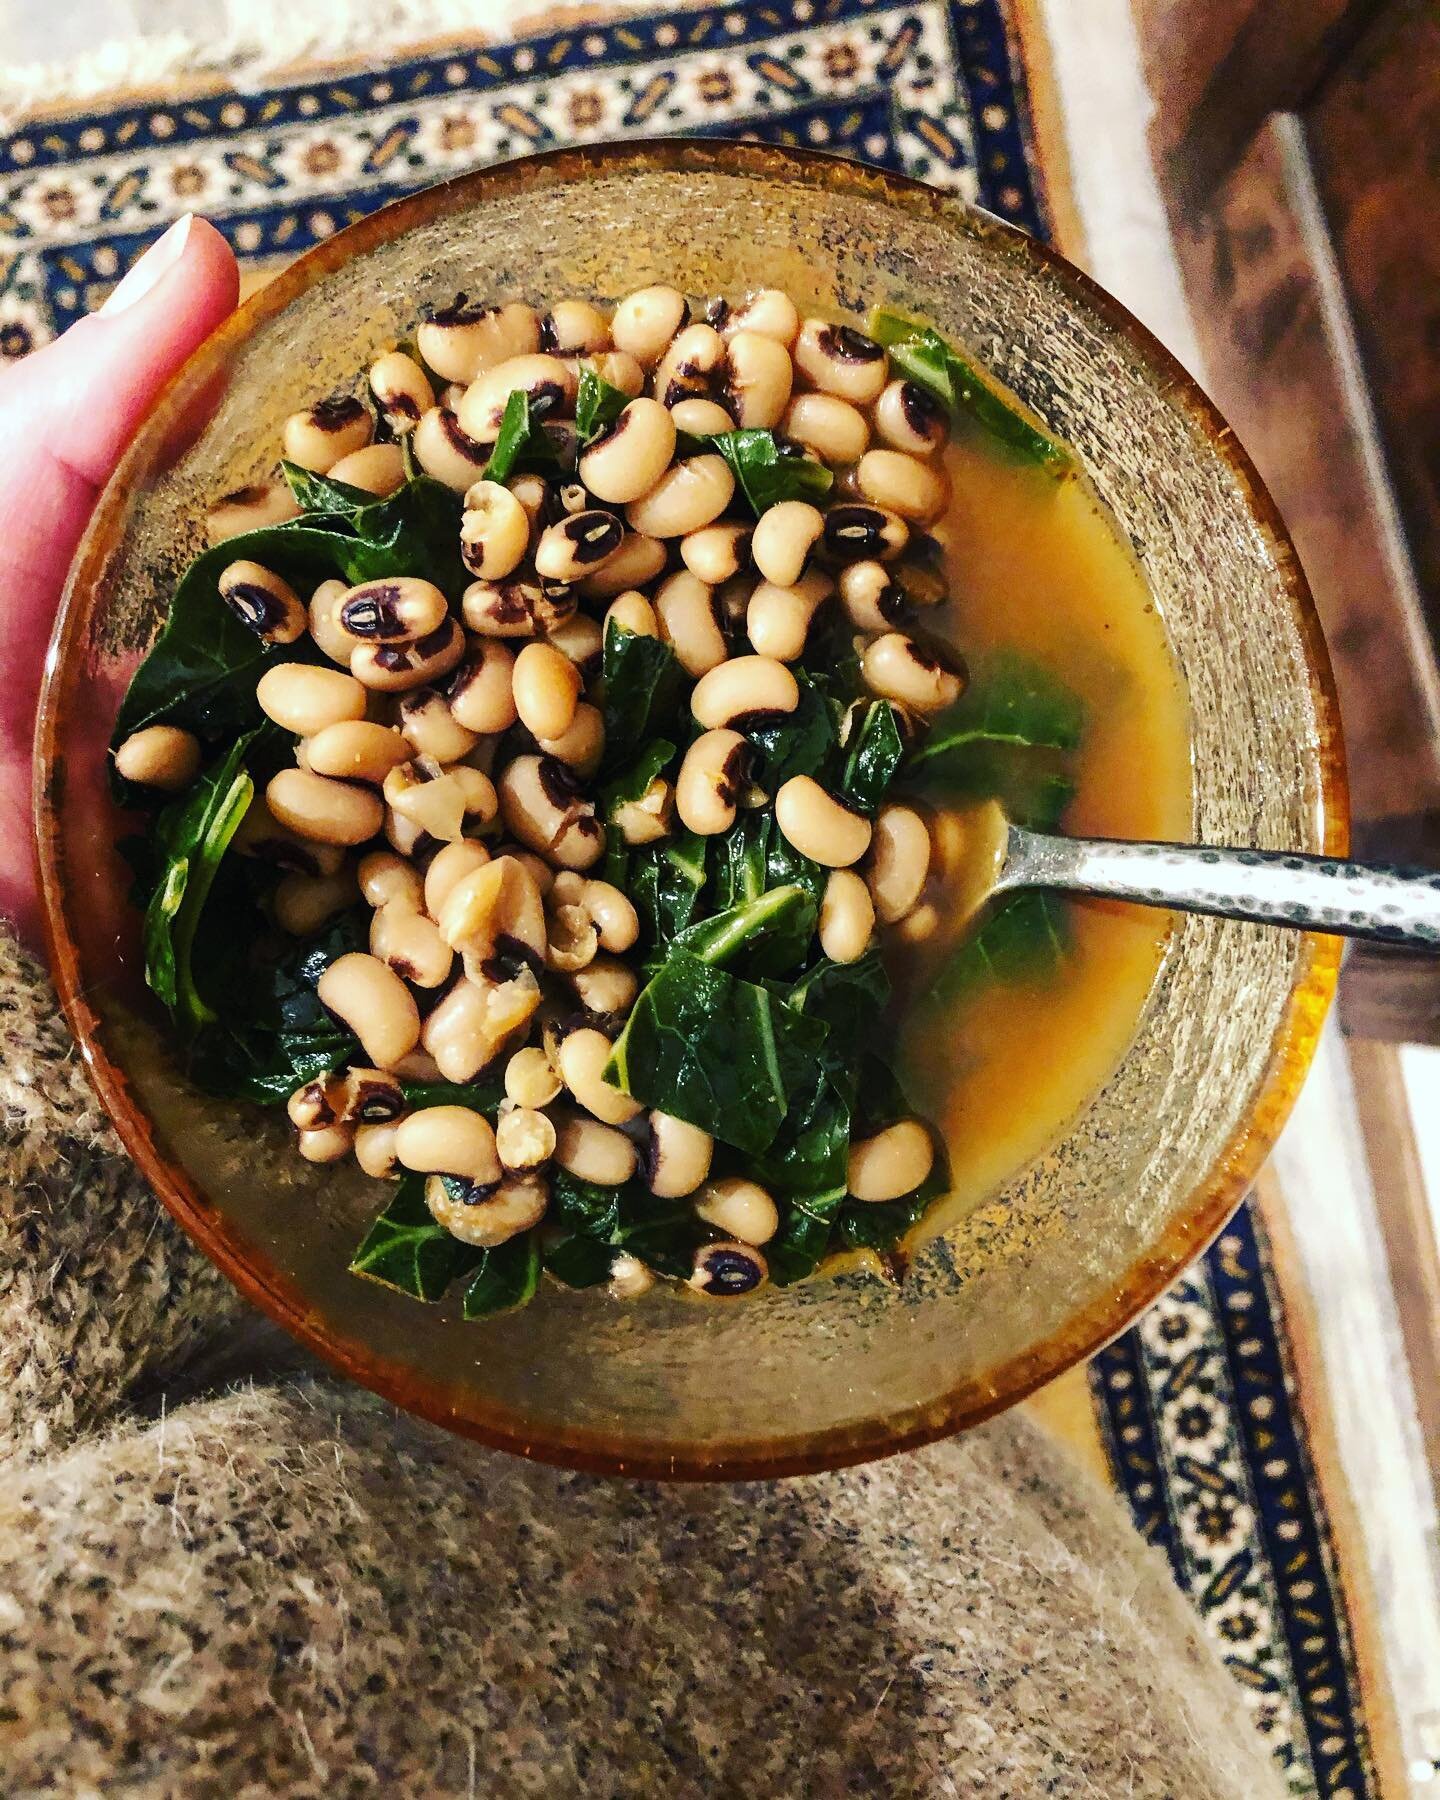 A New Year&rsquo;s Day tradition. Black-eyed peas and collard greens 🥬 
So simple and so delicious. I richened the broth with dried herbs, confit garlic and smoky paprika. Toss in the chopped greens 10-15min before your ready to serve and top with s